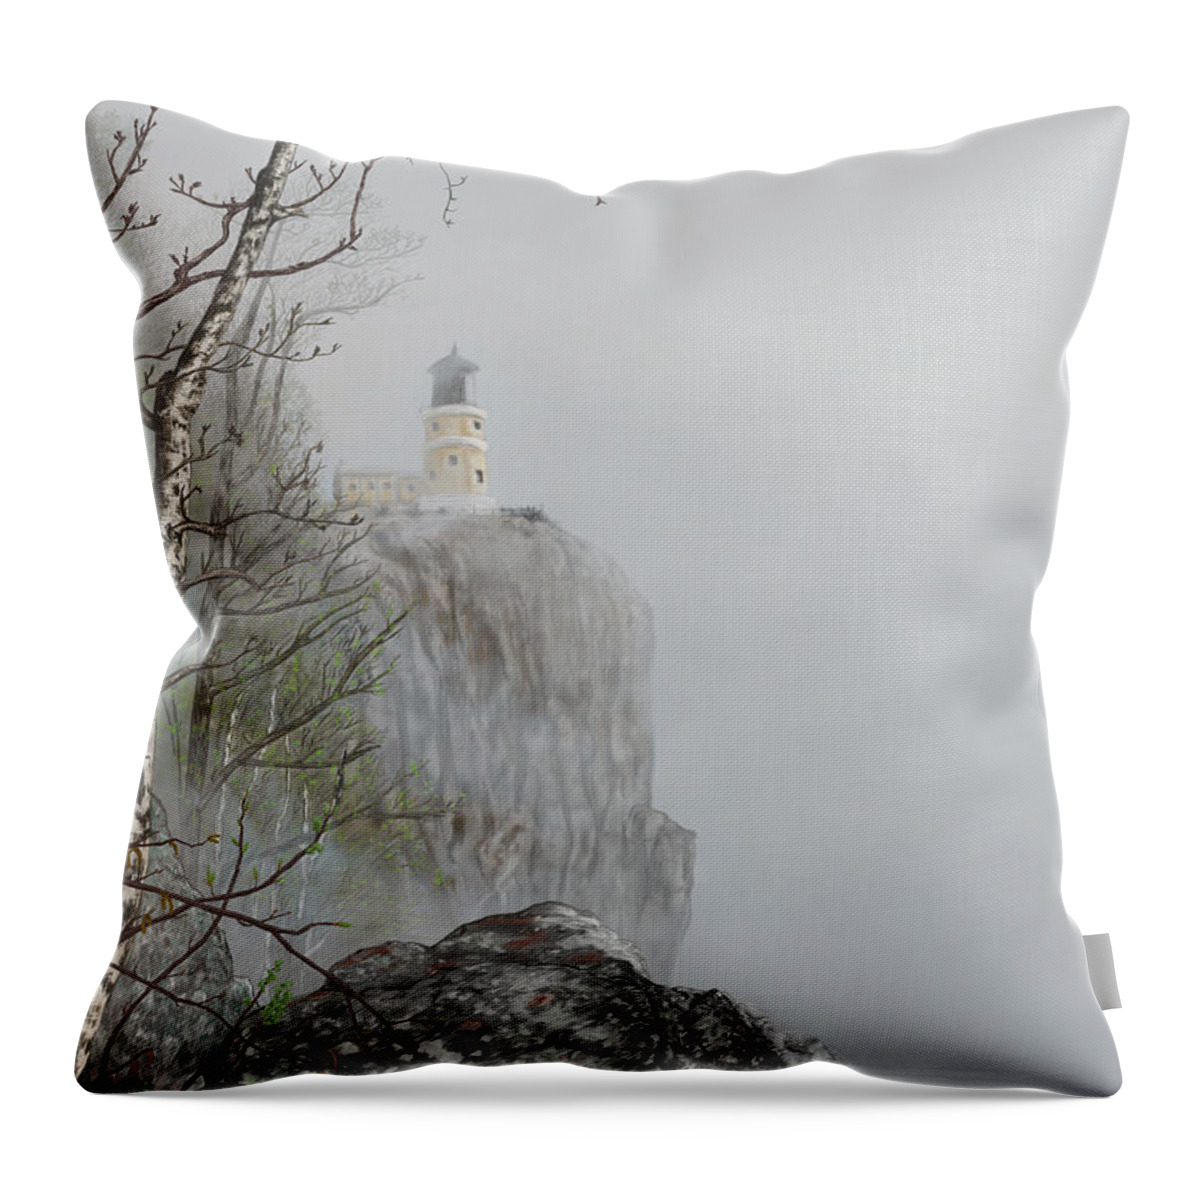 North Shore Lighthouse In The Fog Throw Pillow featuring the digital art North Shore Lighthouse in the Fog by Troy Stapek